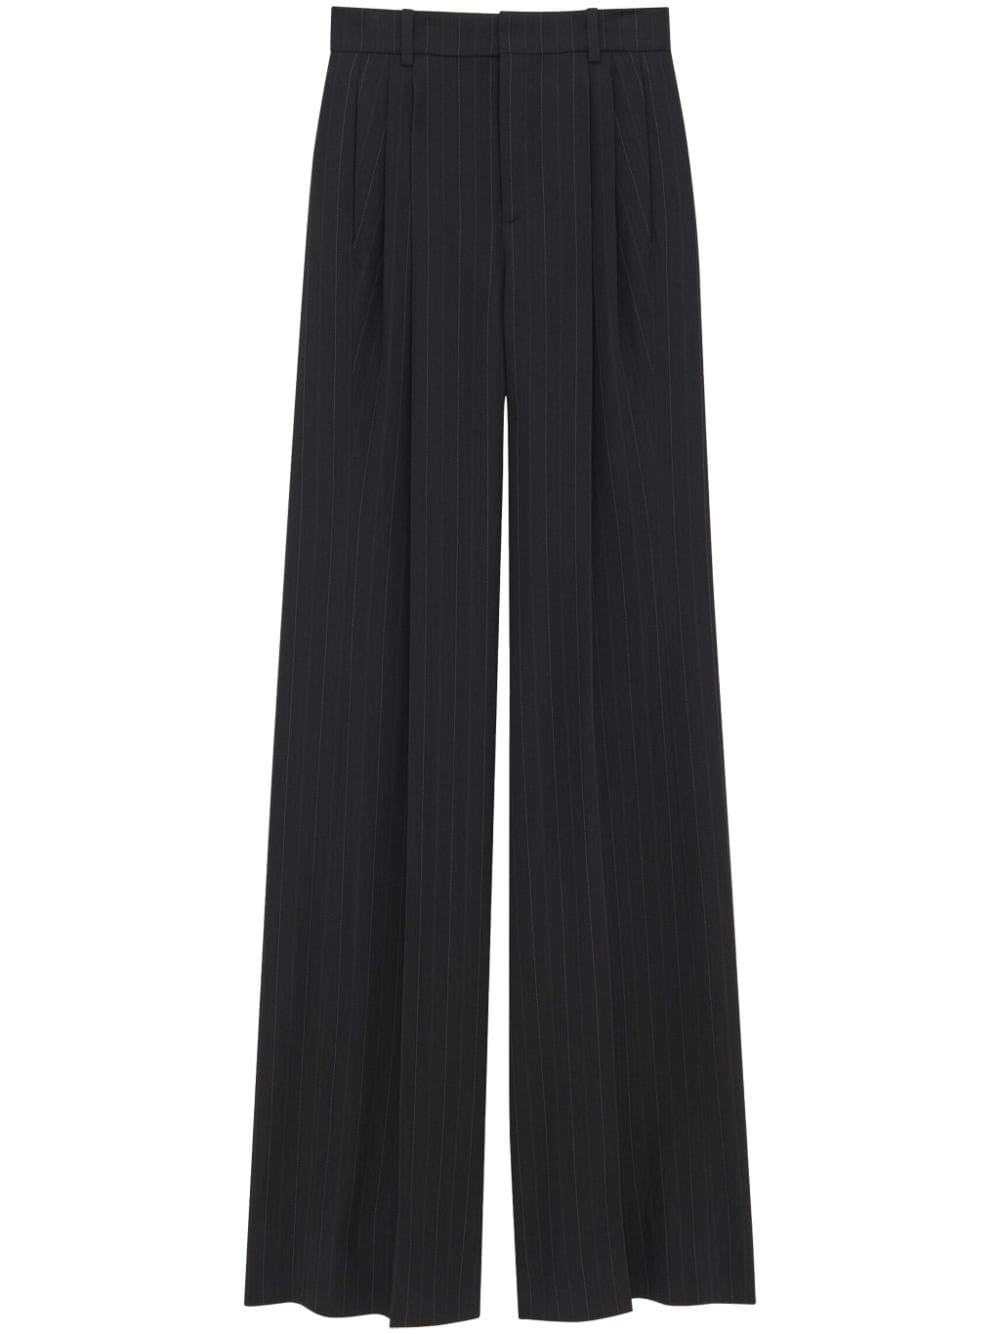 Image 1 of Saint Laurent pinstripe wide-leg tailored trousers